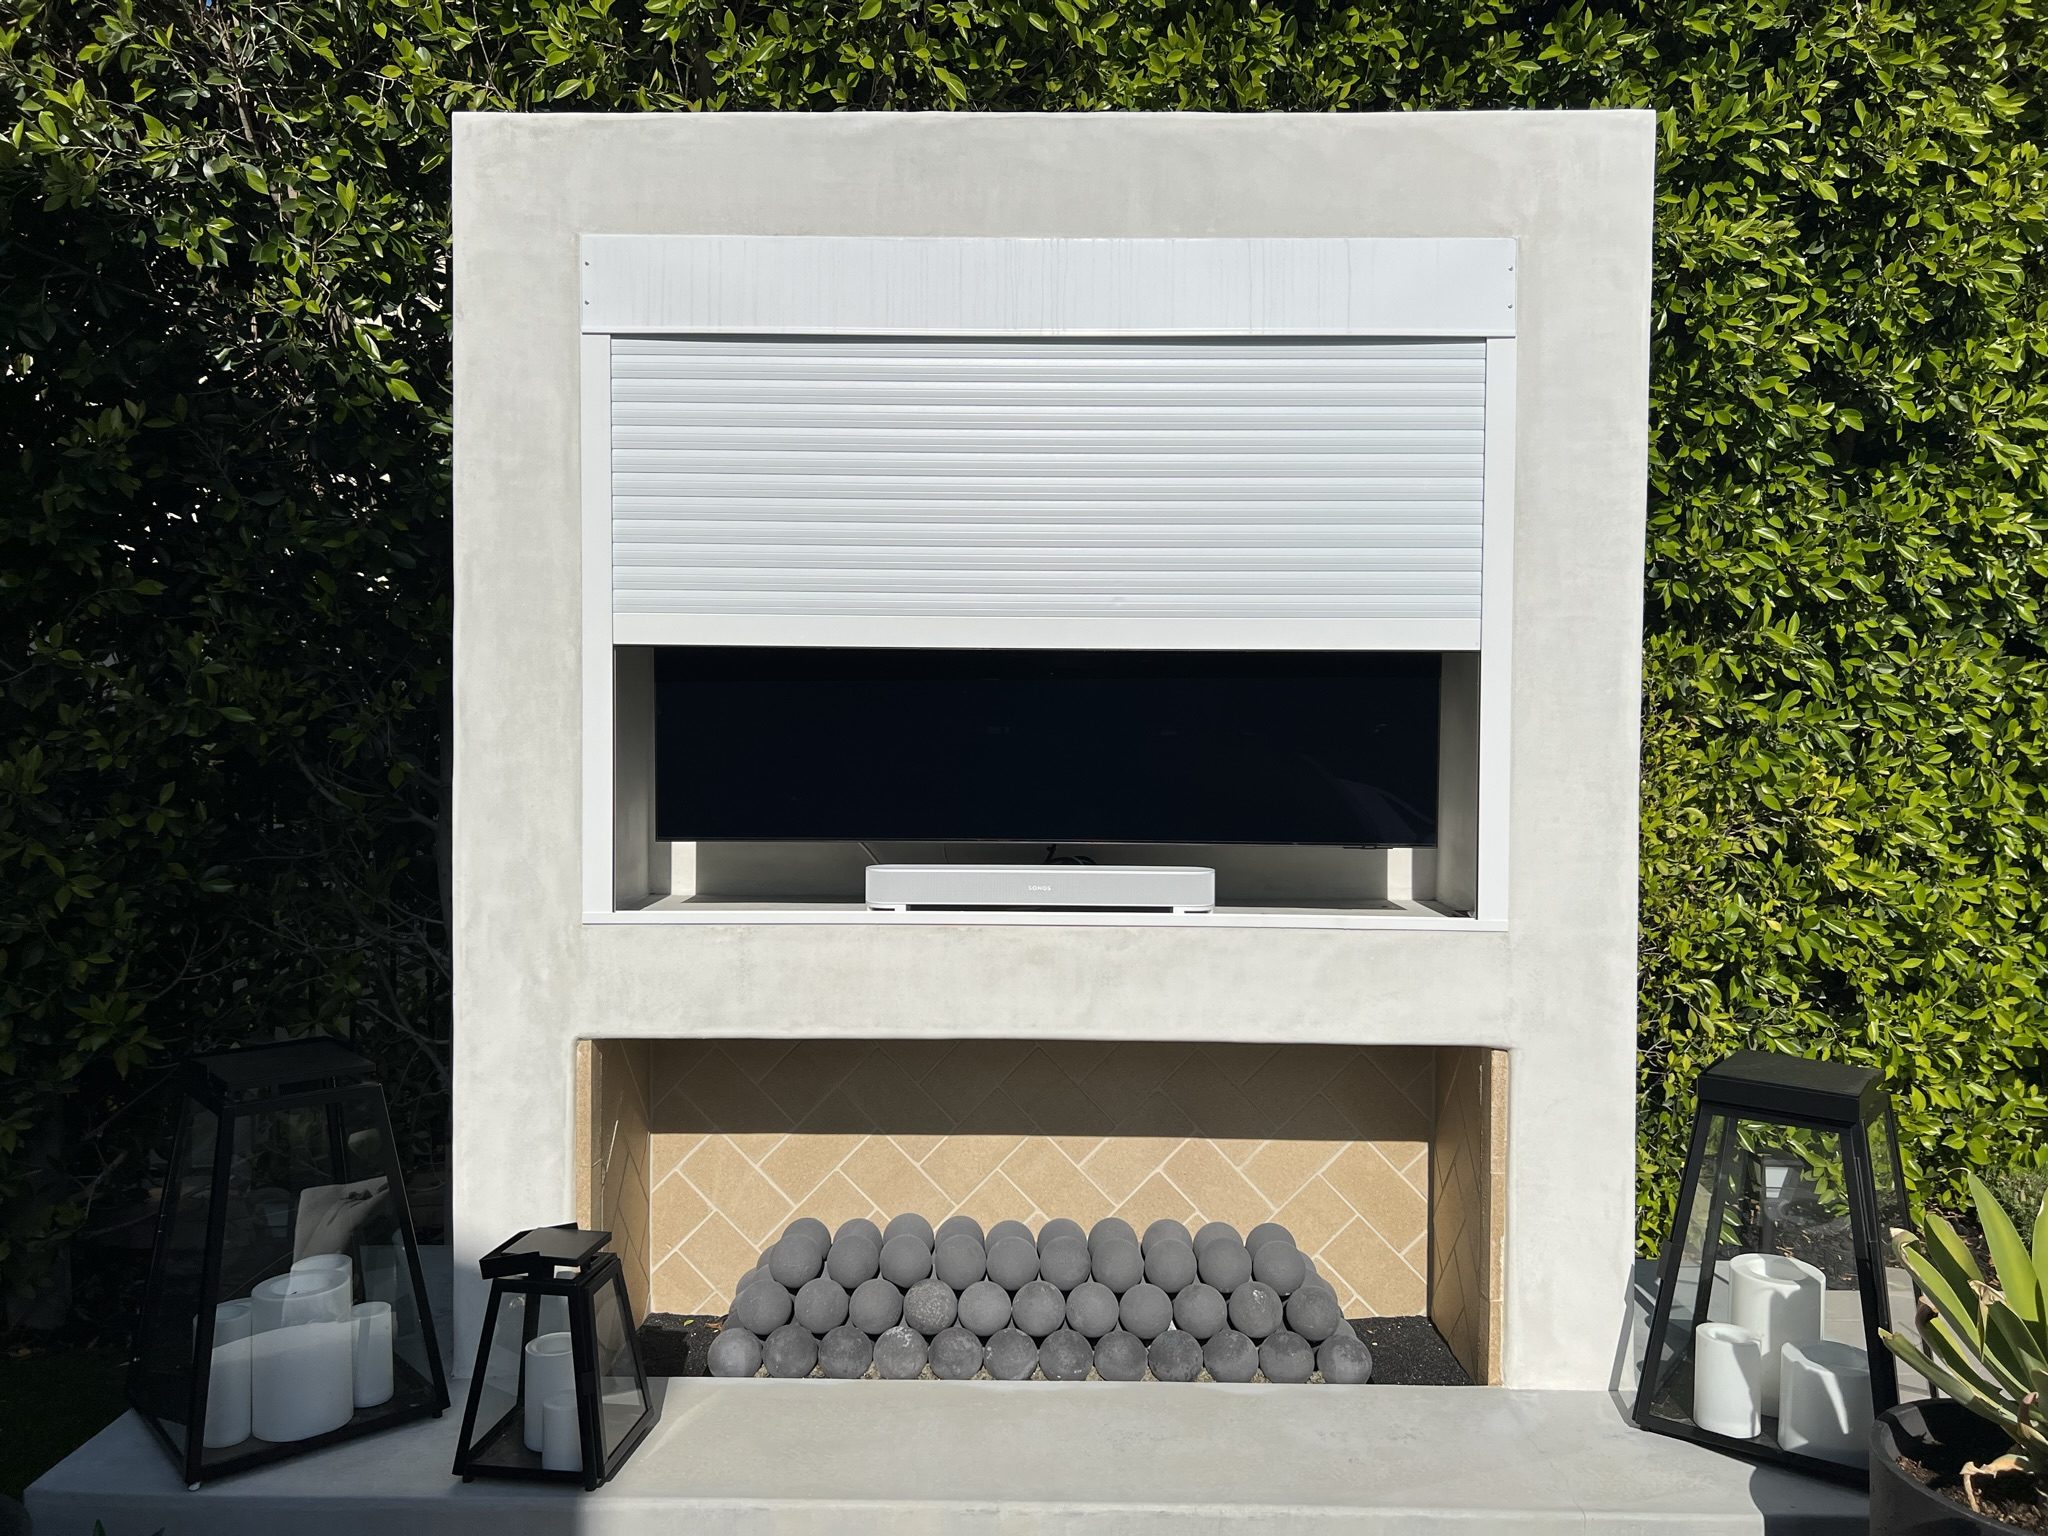 An image of an outdoor TV enclosure with half of its Roll-A-Shield rolling shutters down